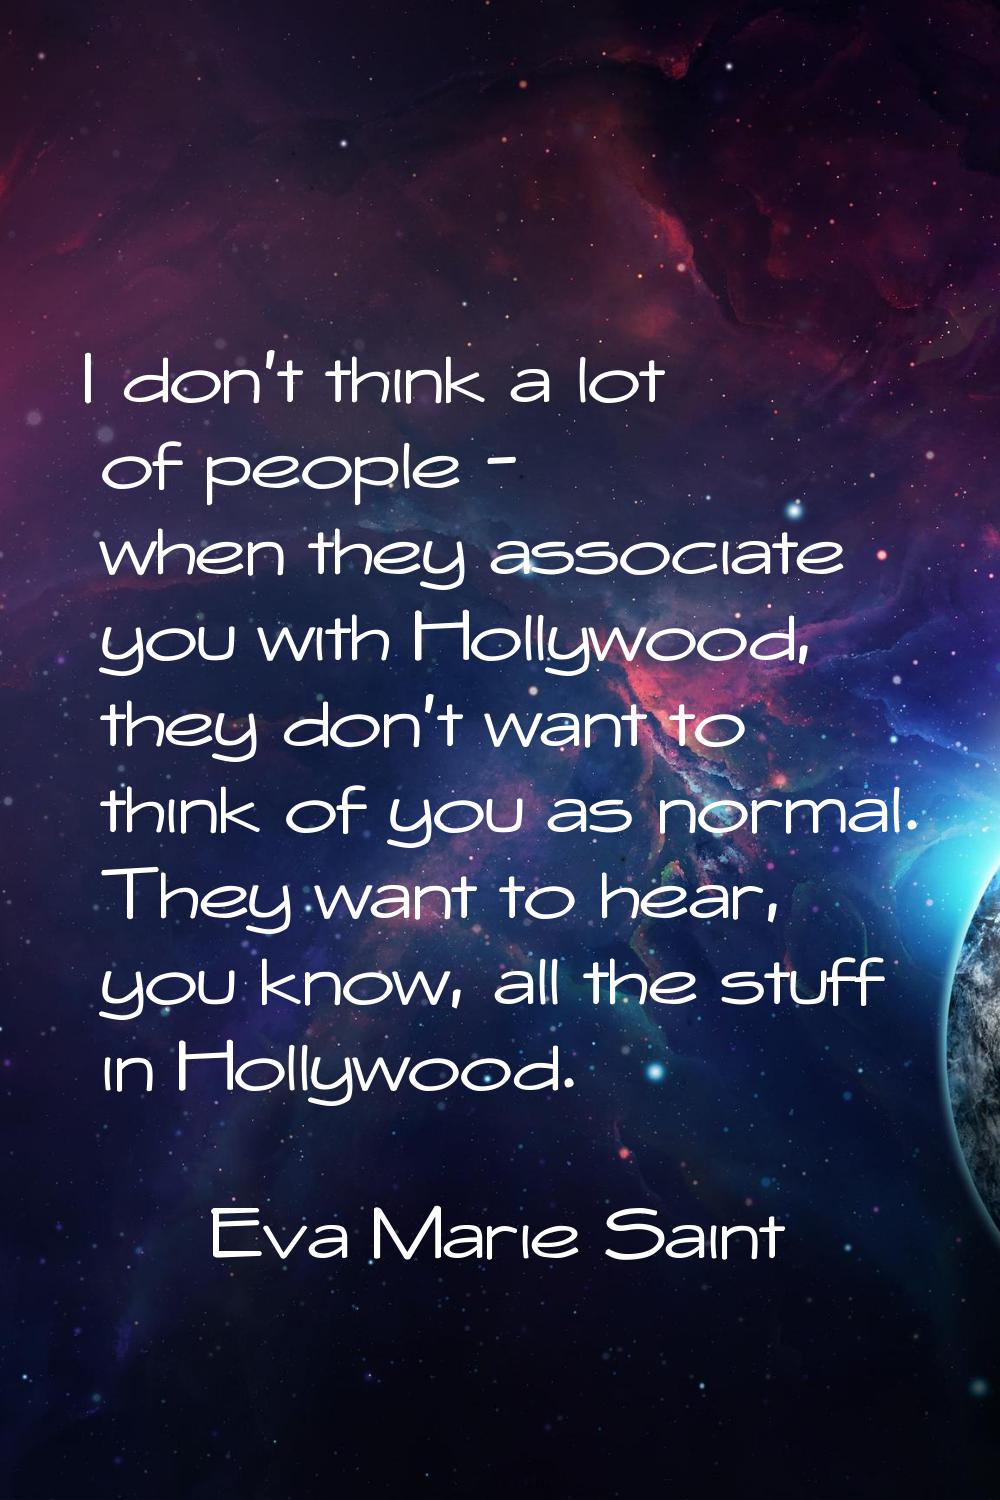 I don't think a lot of people - when they associate you with Hollywood, they don't want to think of